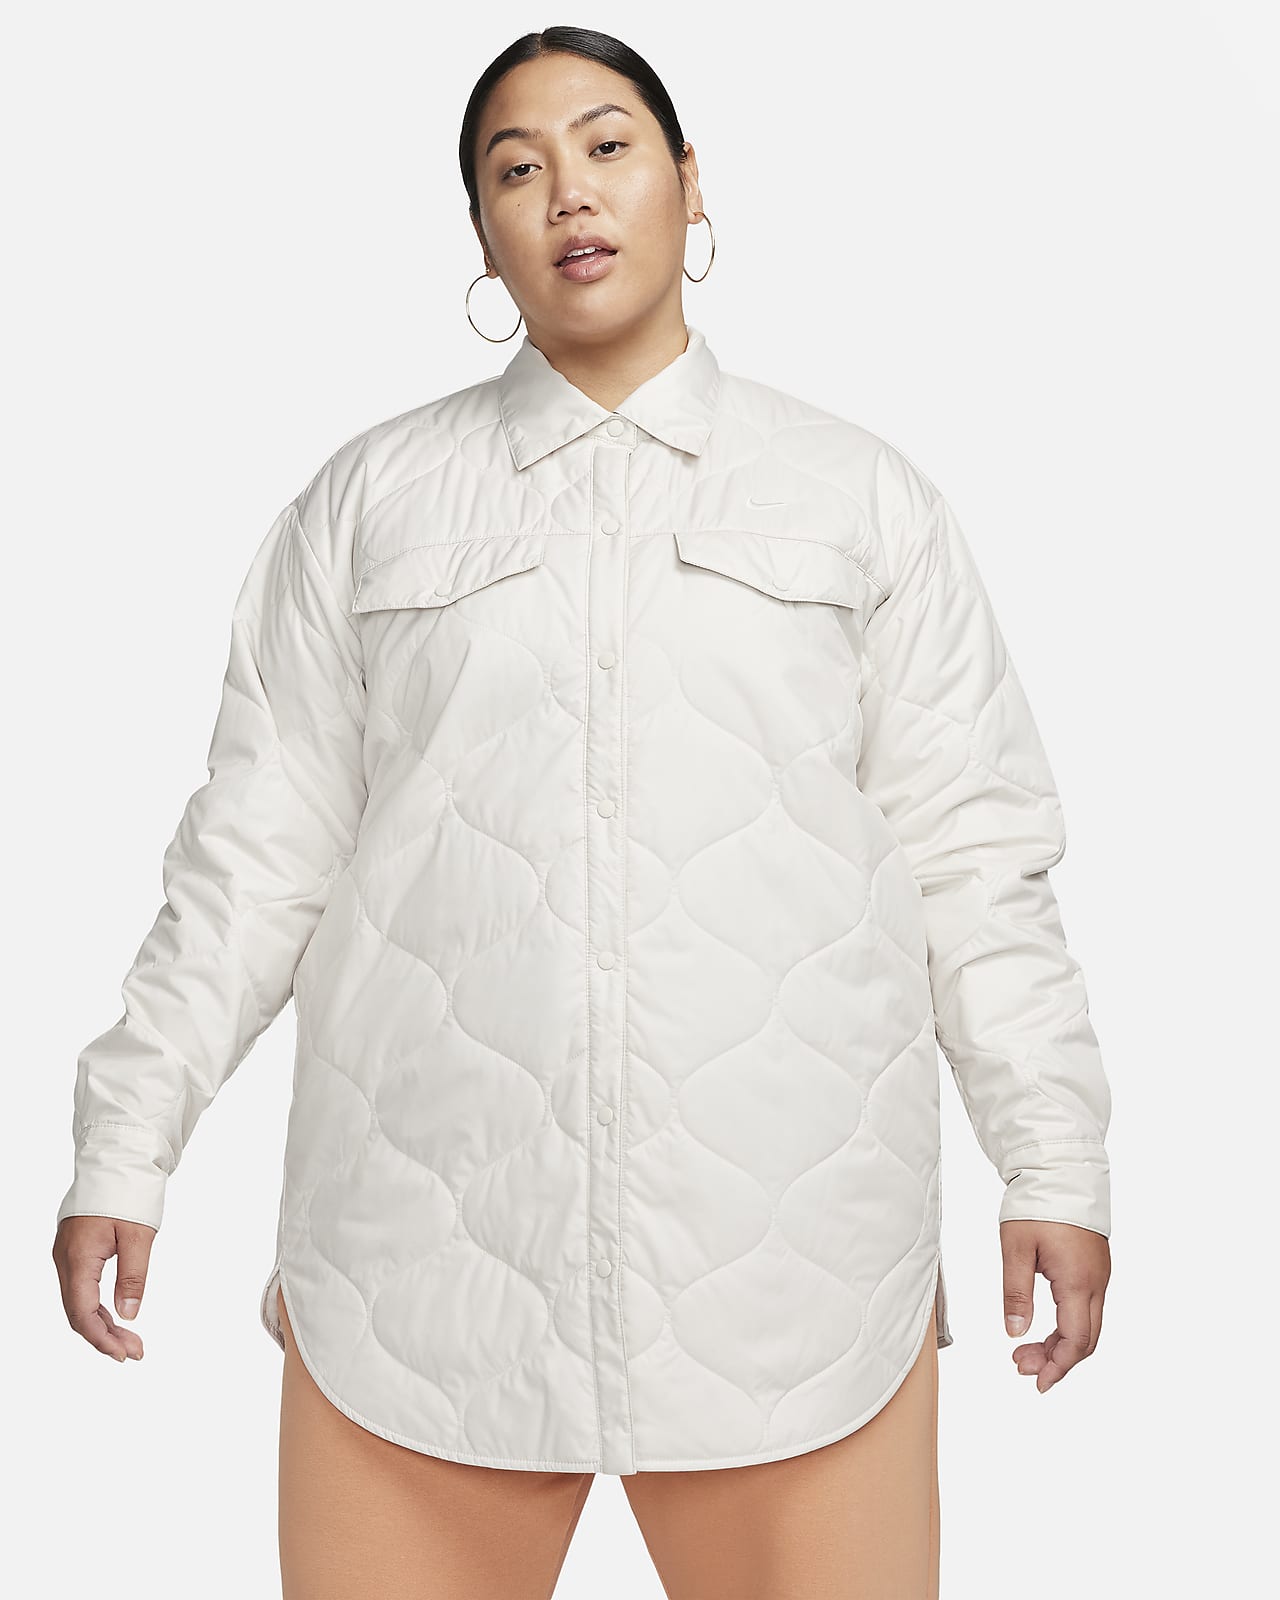 Nike Sportswear Essential Women's Quilted Trench.